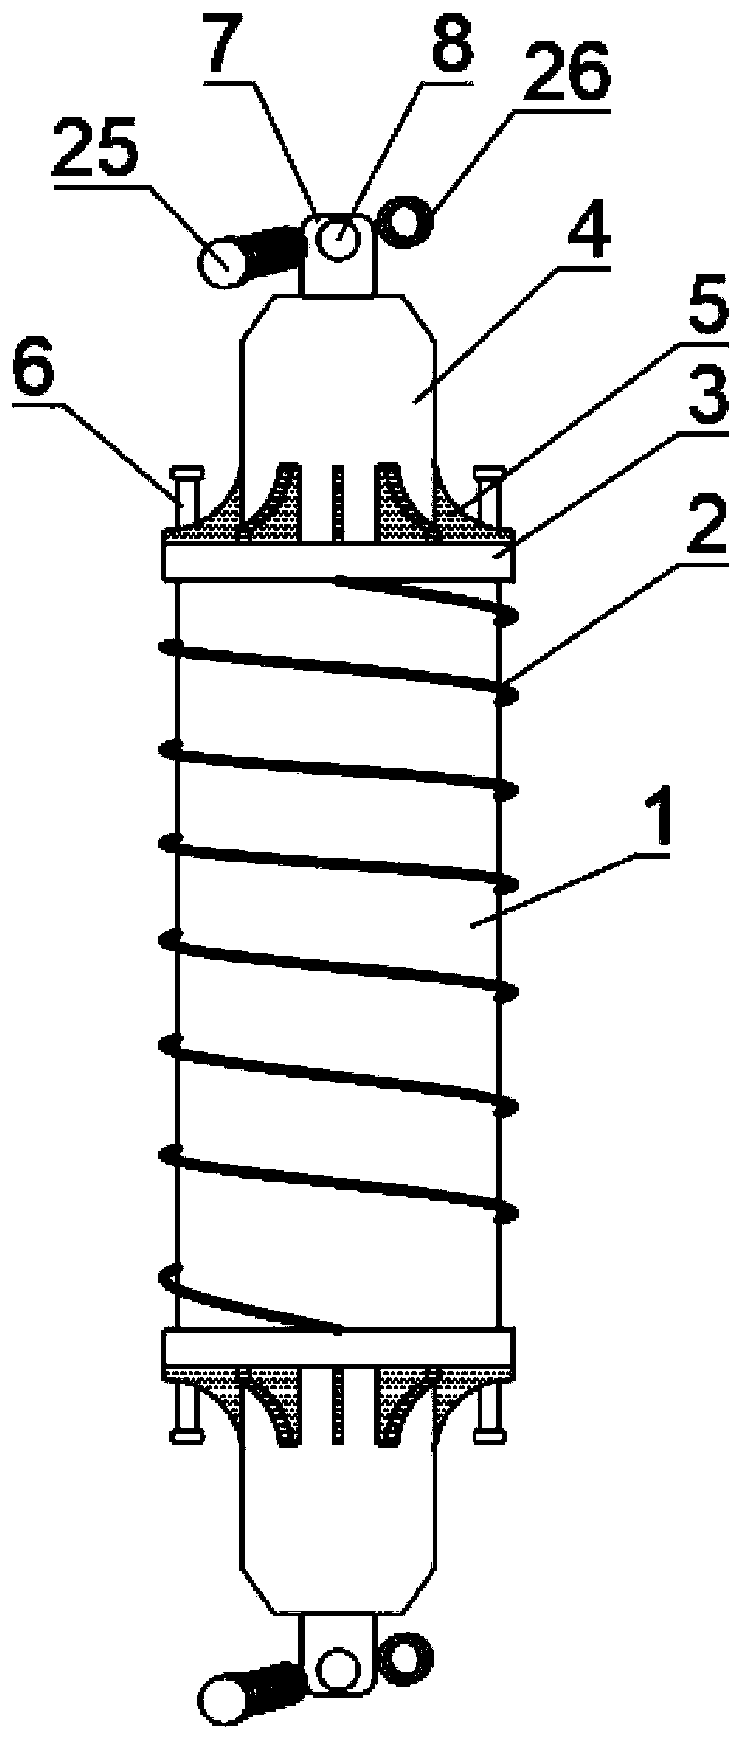 Limit shock absorber structure